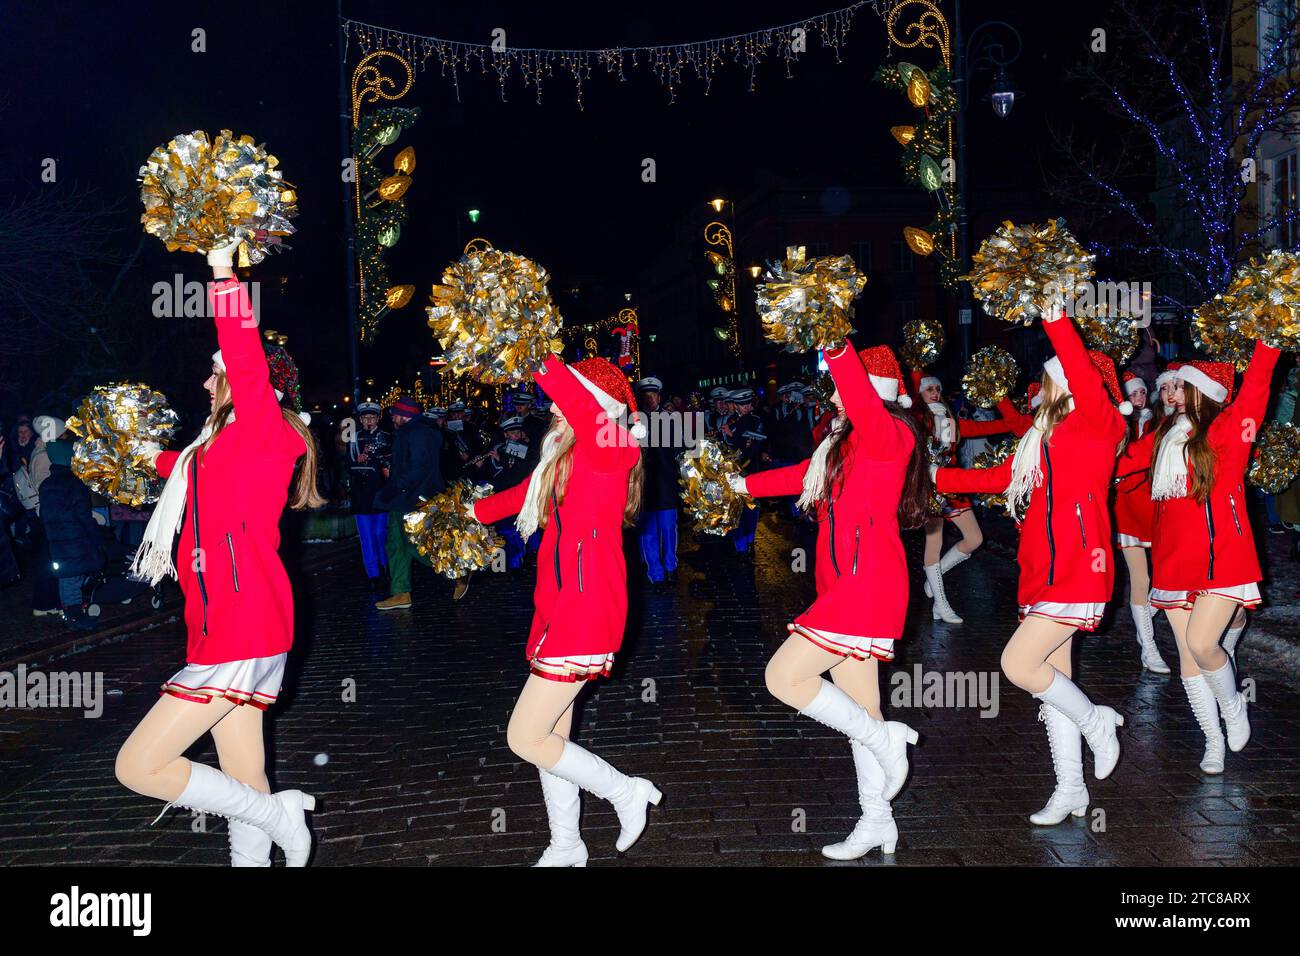 Mykanow youth brass band during the Christmas parade on the streets of the Old Town in Warsaw. The Warsaw city hall invited the brass band to the pre-Christmas parade to walk through the old town in festive costumes. Warsaw Poland Copyright: xMikolajxJaneczekx Credit: Imago/Alamy Live News Stock Photo